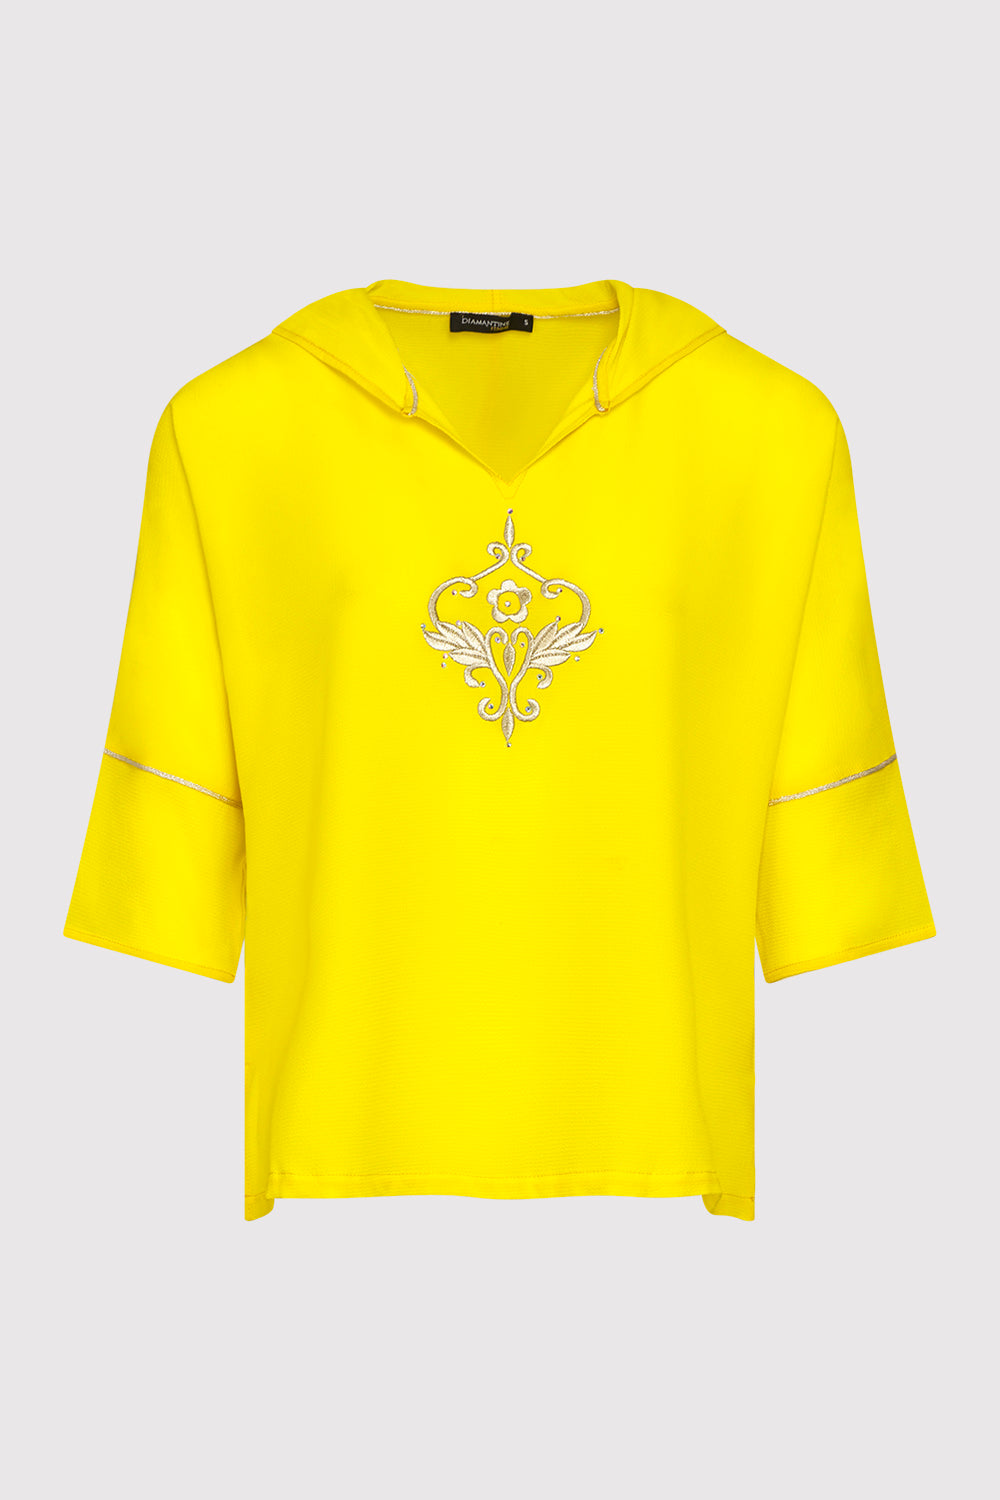 Katalina Embroidered Lightweight Casual Hooded Top in Yellow